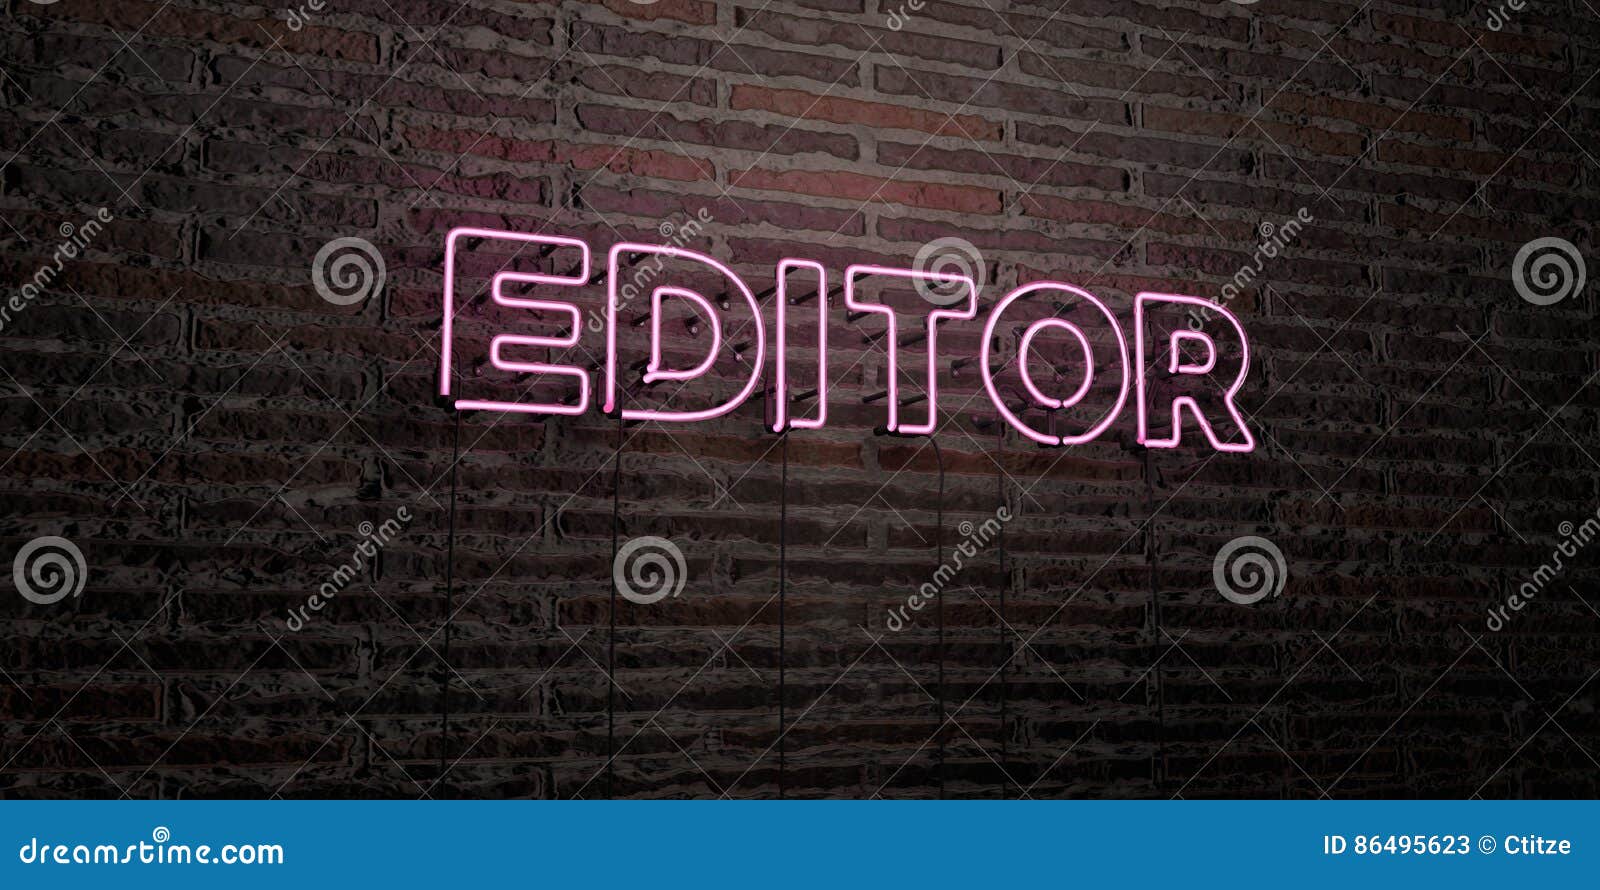 editor -realistic neon sign on brick wall background - 3d rendered royalty free stock image